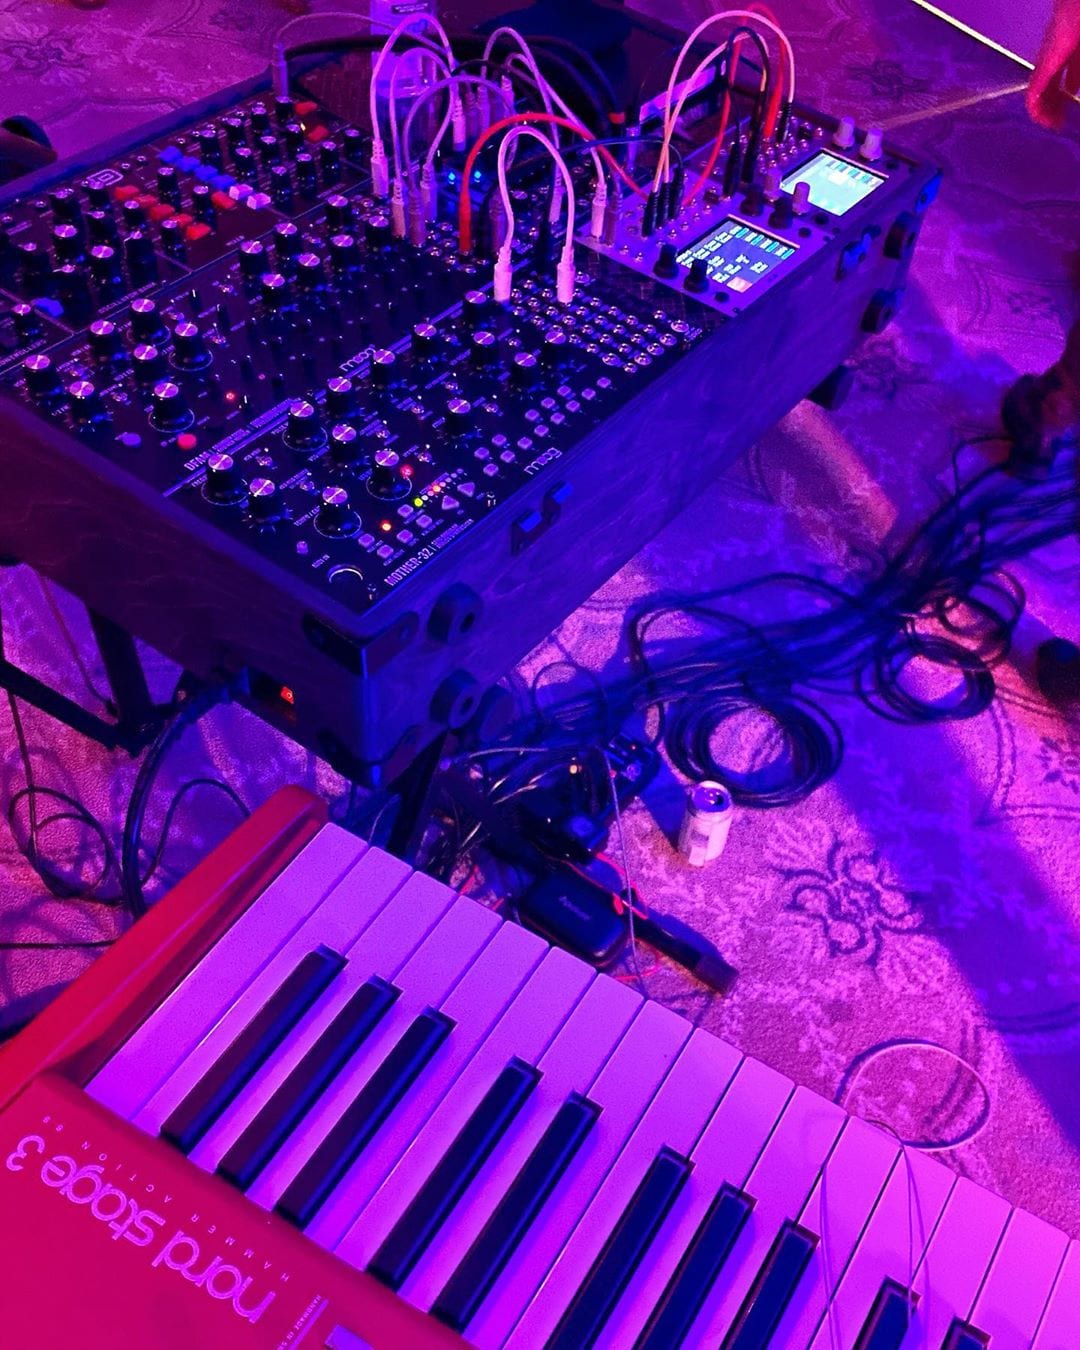 Just for fun, I brought my modular synth to the gig this weekend. I only played 2 or 3 notes on it but I did enjoy looking at it all night